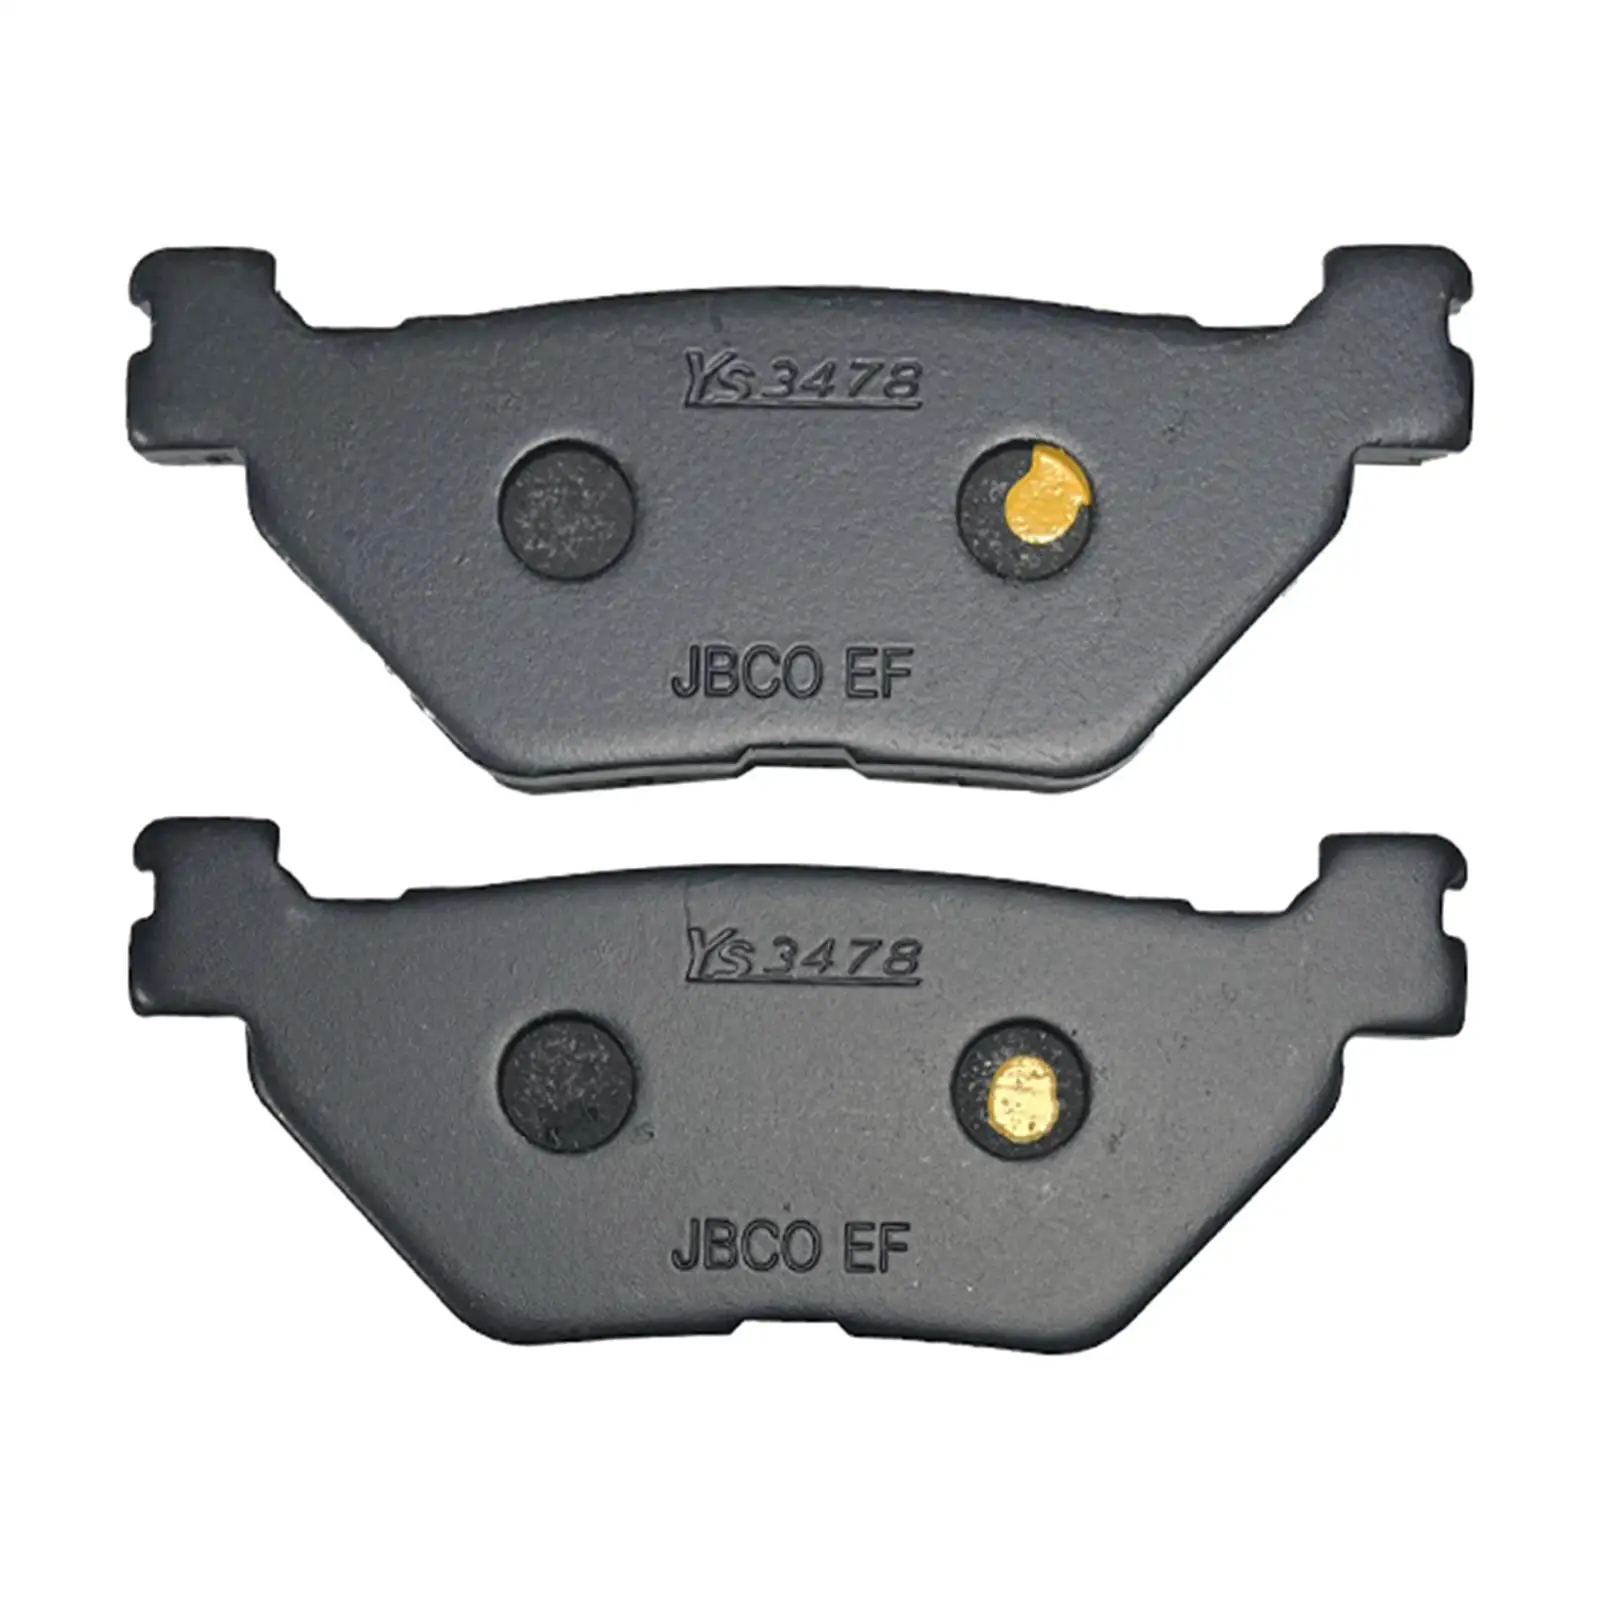 Brake Pads Kit Accessories for Tdm 900 Lightweight Vehicle Repair Parts